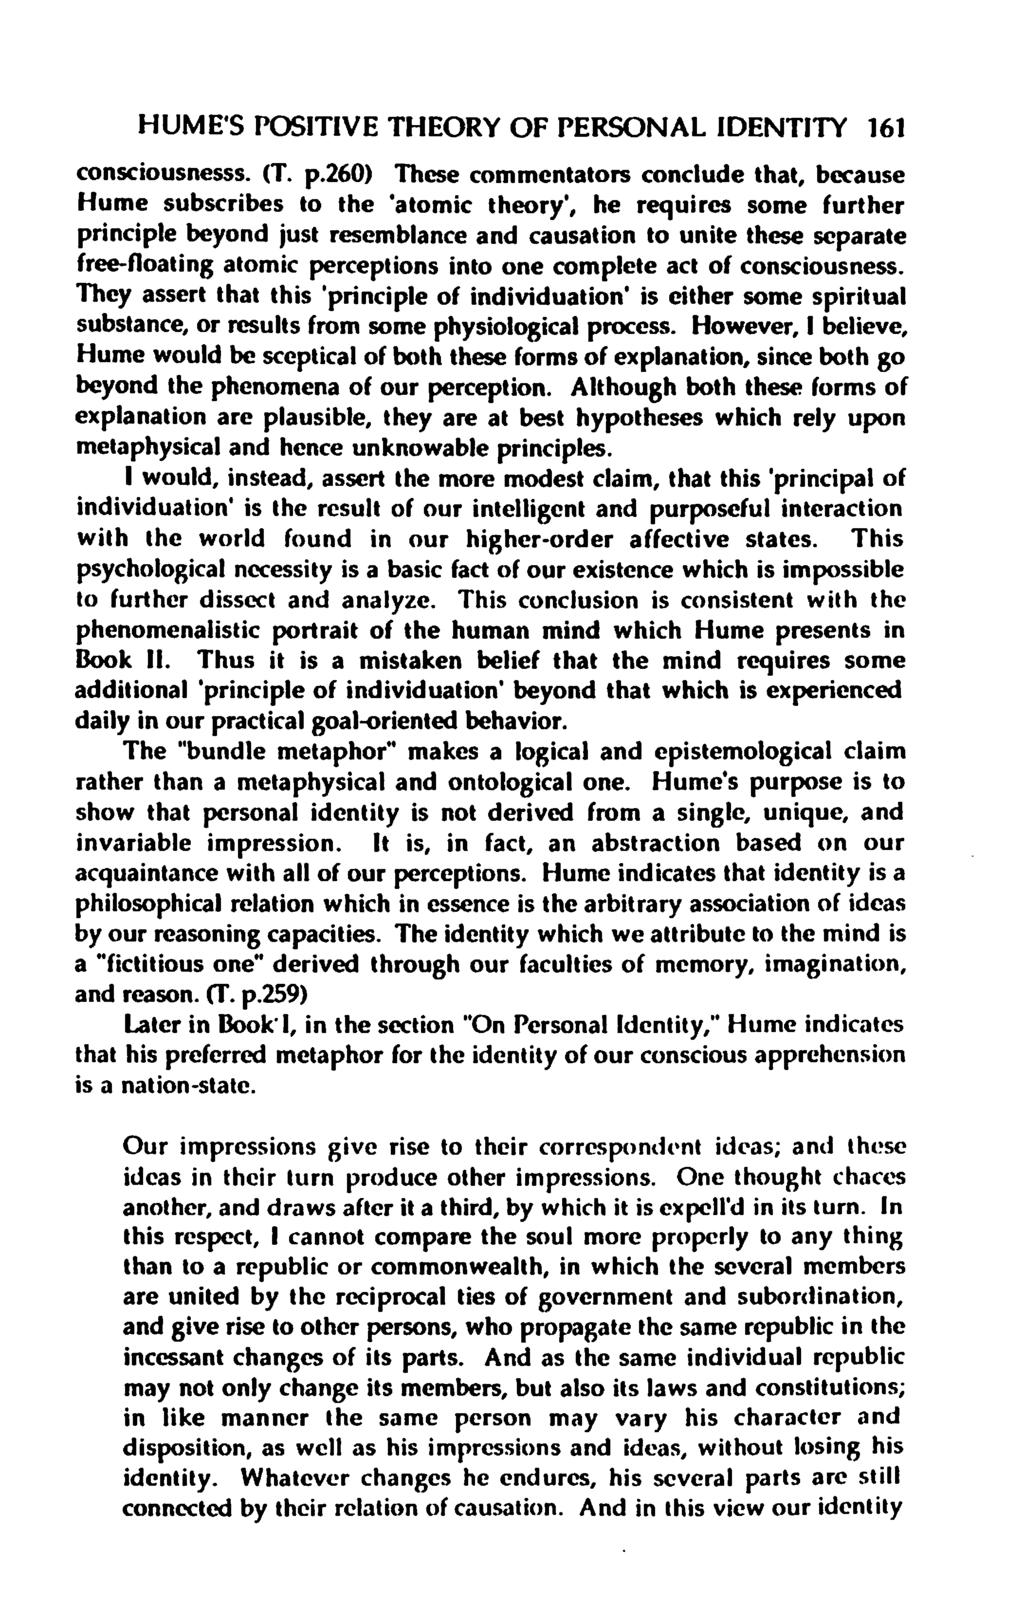 HUME'S POSITIVE THEORY OF PERSONAL IDENTITY 161 consciousnesss. (T. p.